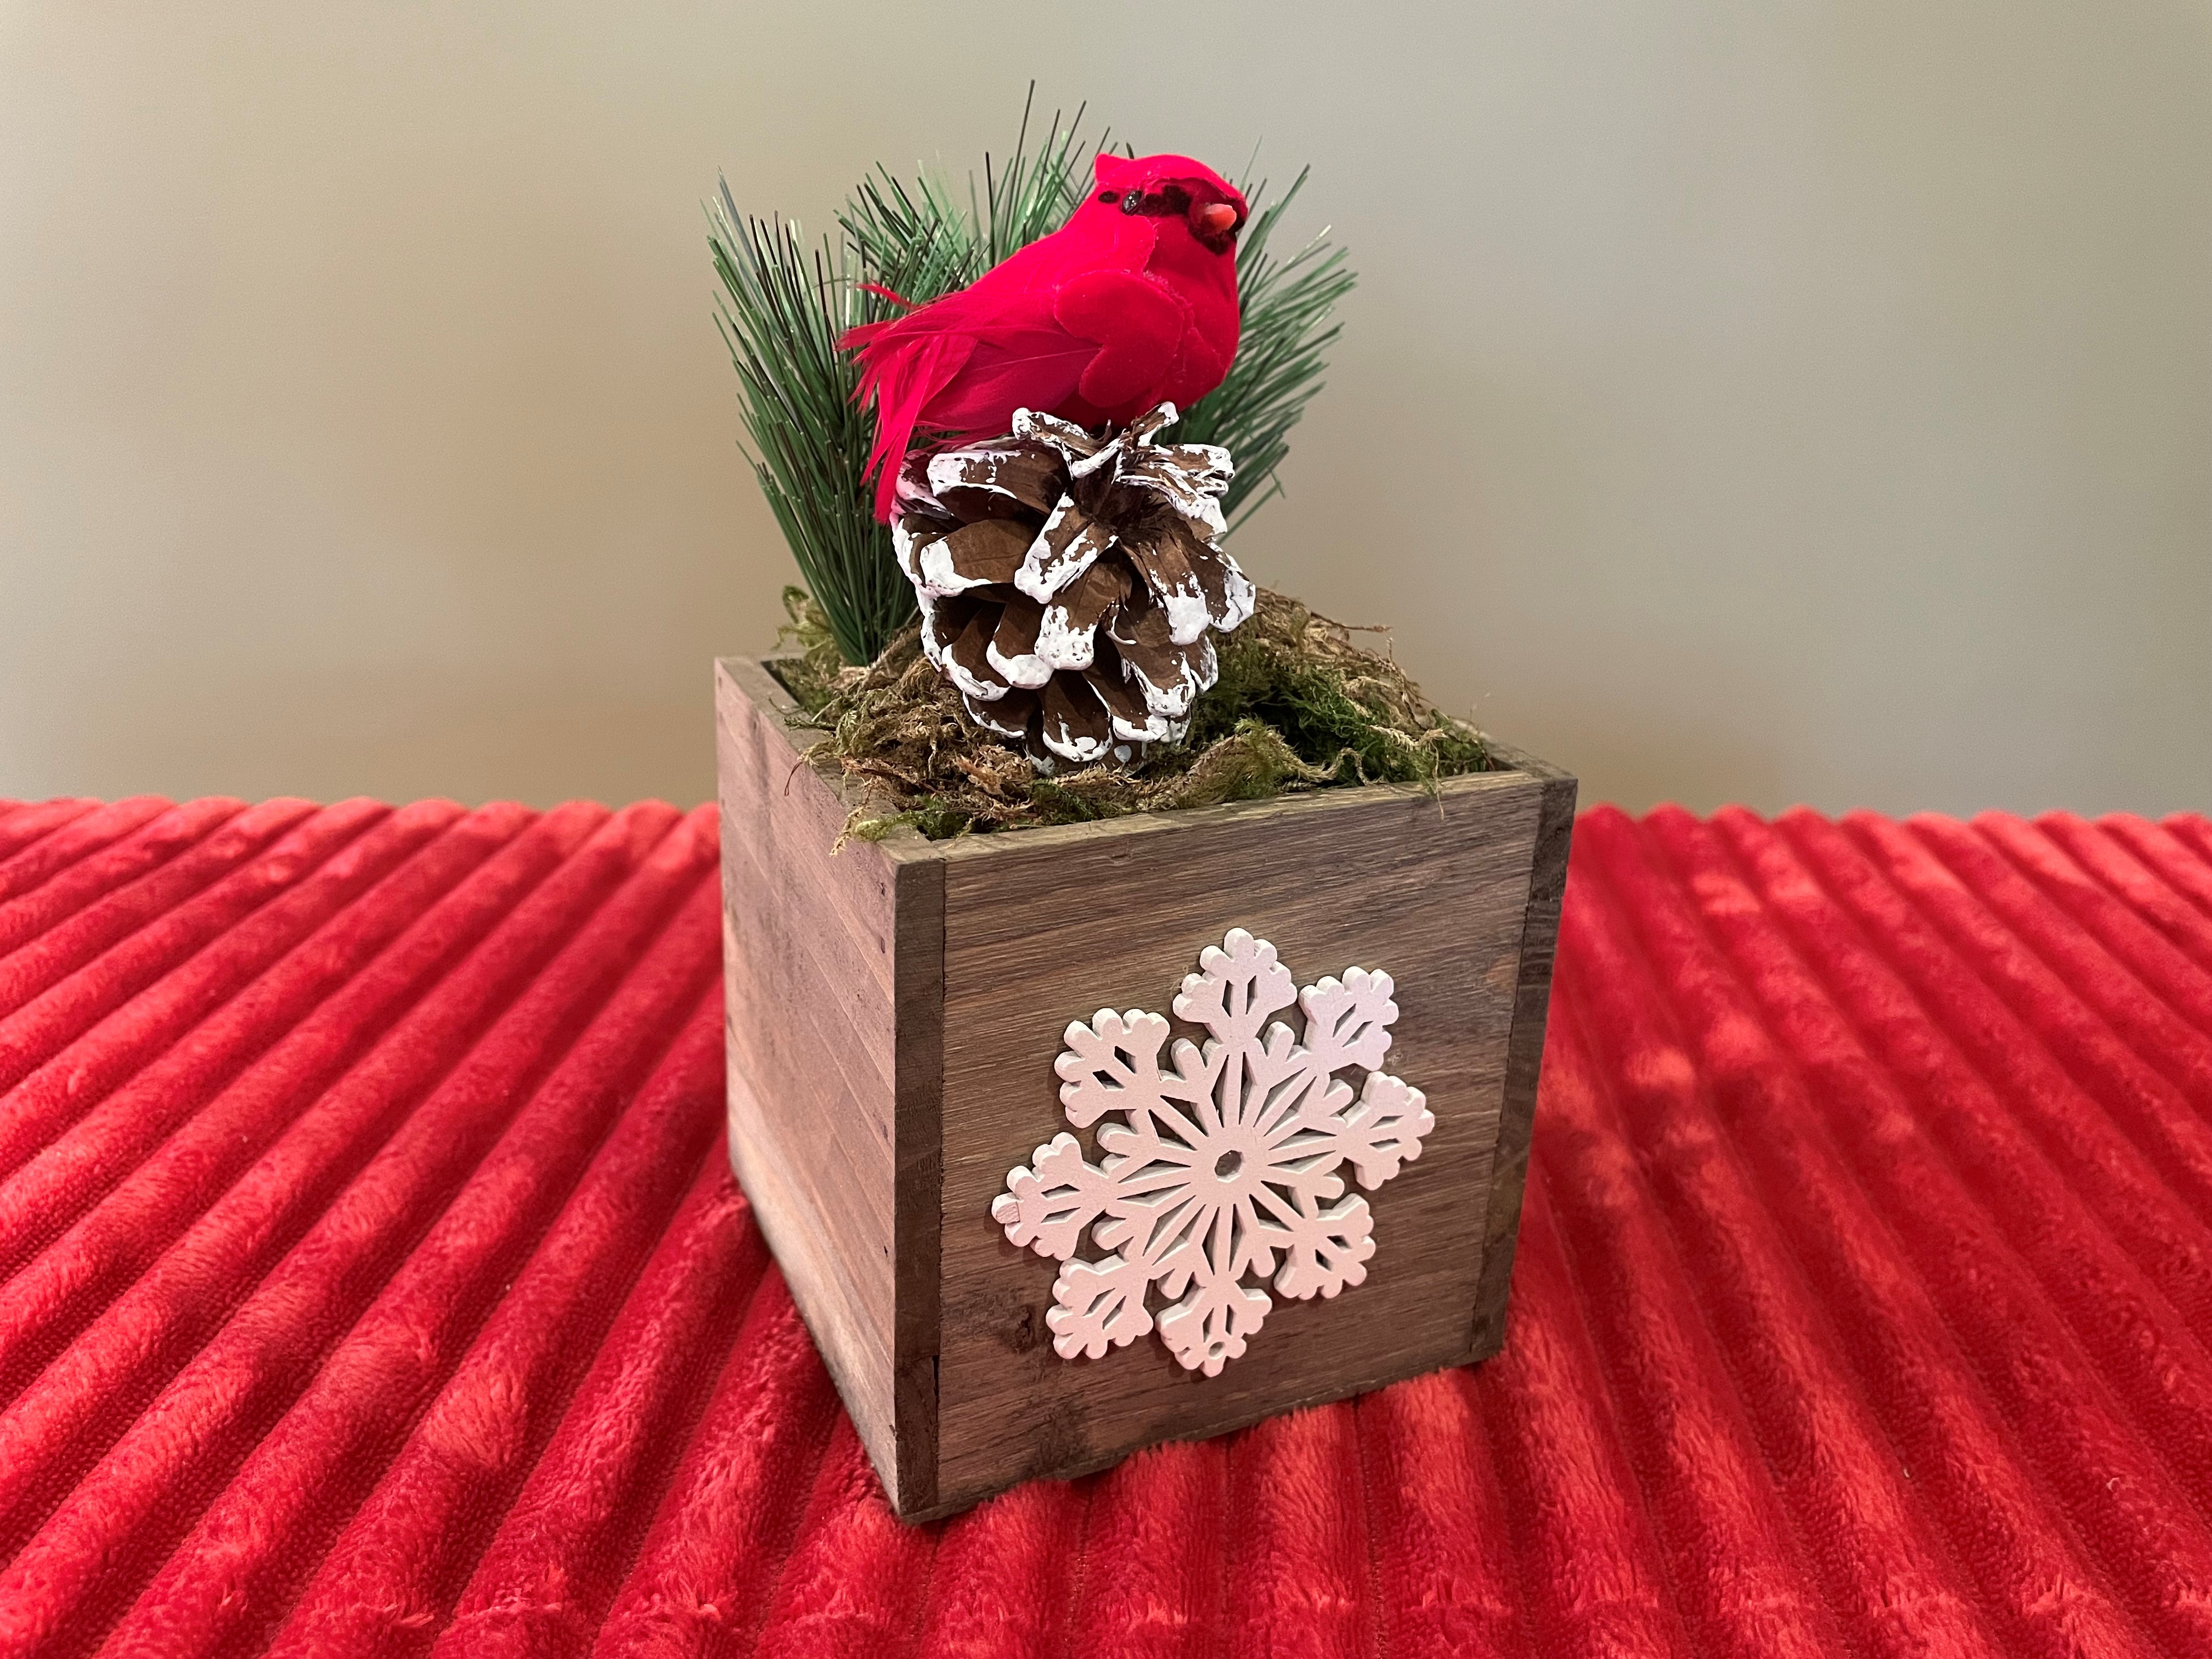 A centerpiece made of a wooden planter with a white snowflake on the front. Filled with greenery, a pine cone, and a red cardinal bird.